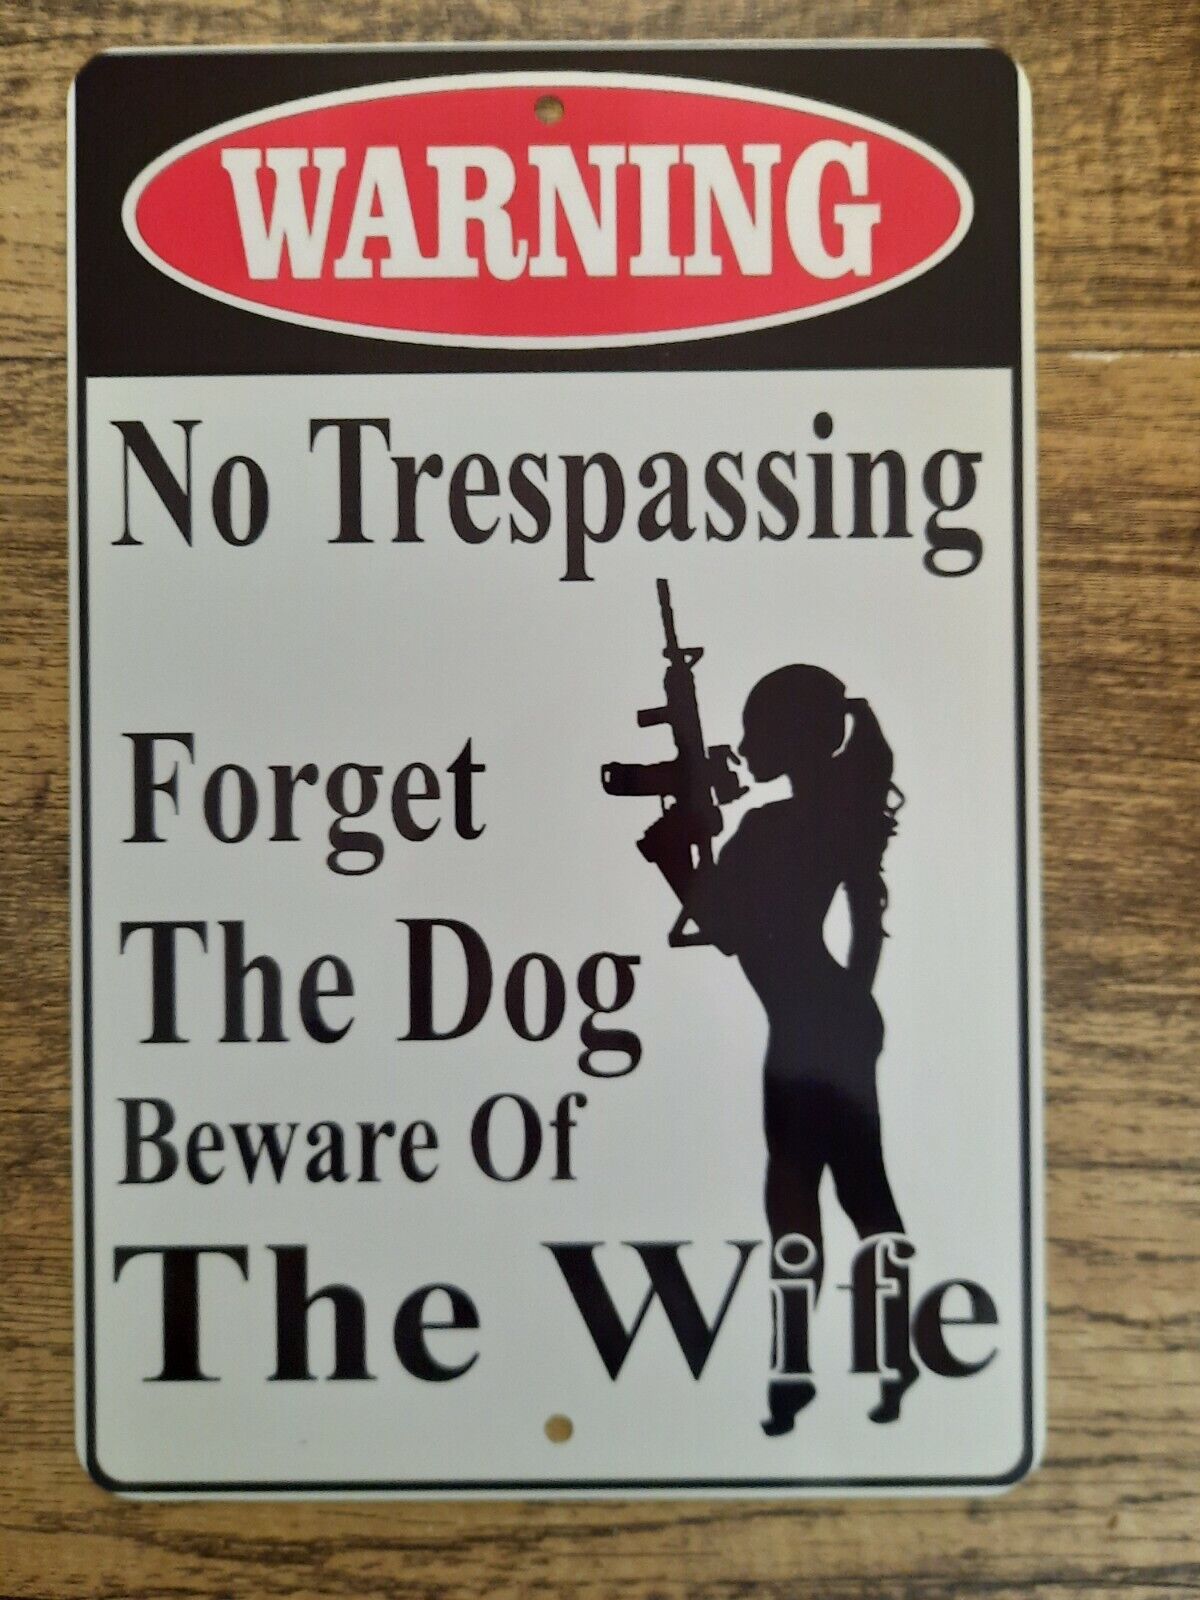 Warning Beware of the Wife Funny 8x12 Metal Wall Sign